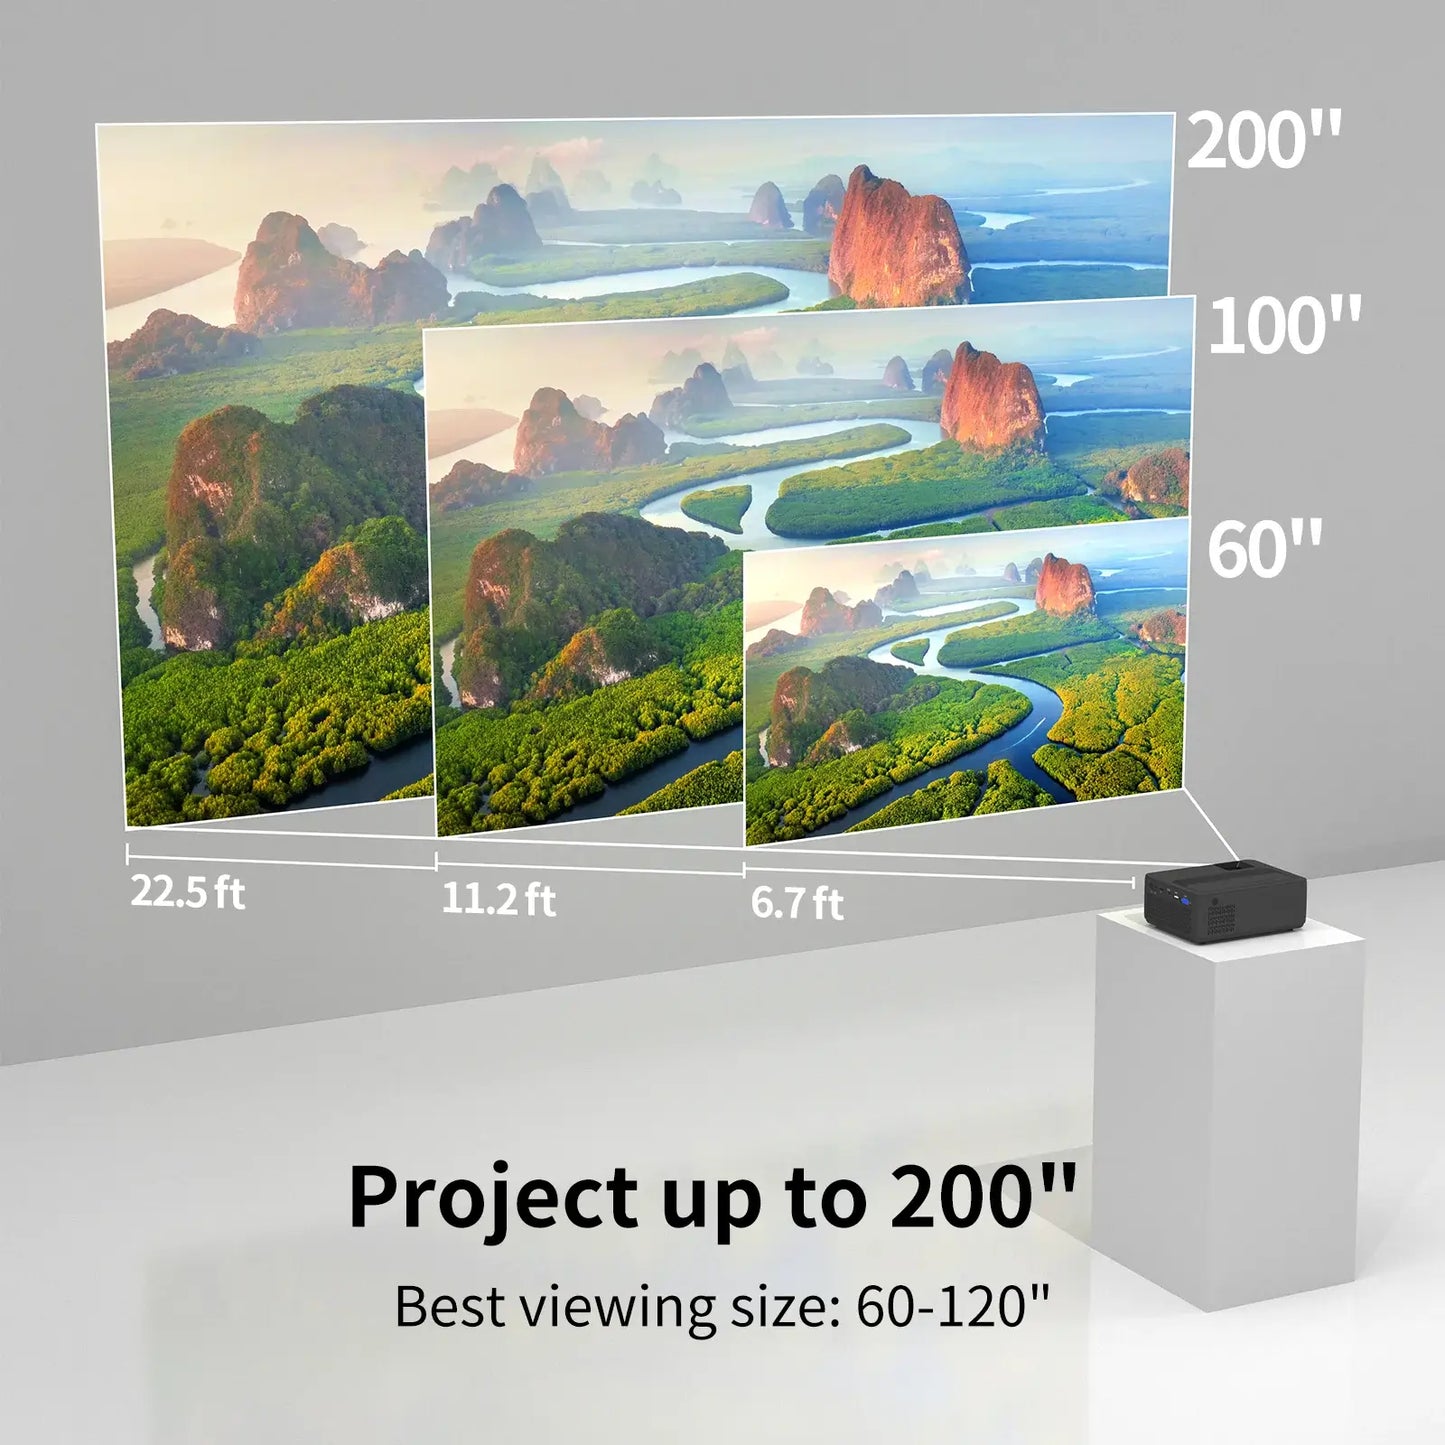 WEWATCH V10 Pro Projector: 150 ANSI Lumens, Native 1080P, 200-inch Screen, Bluetooth Speaker